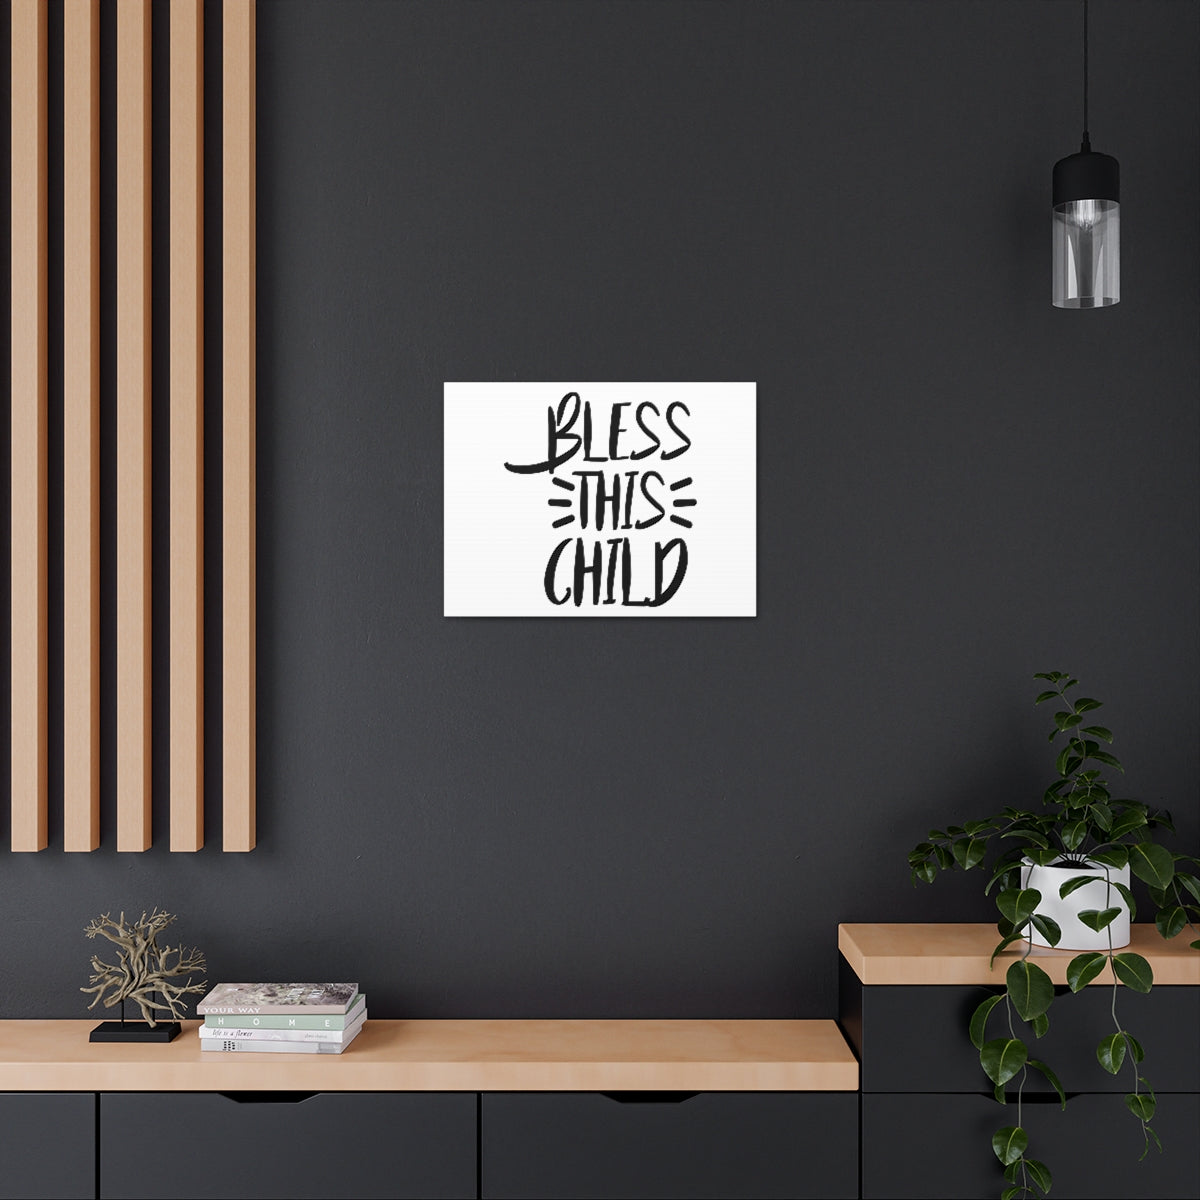 Scripture Walls Bless This Child Luke 18:16 Christian Wall Art Print Ready to Hang Unframed-Express Your Love Gifts